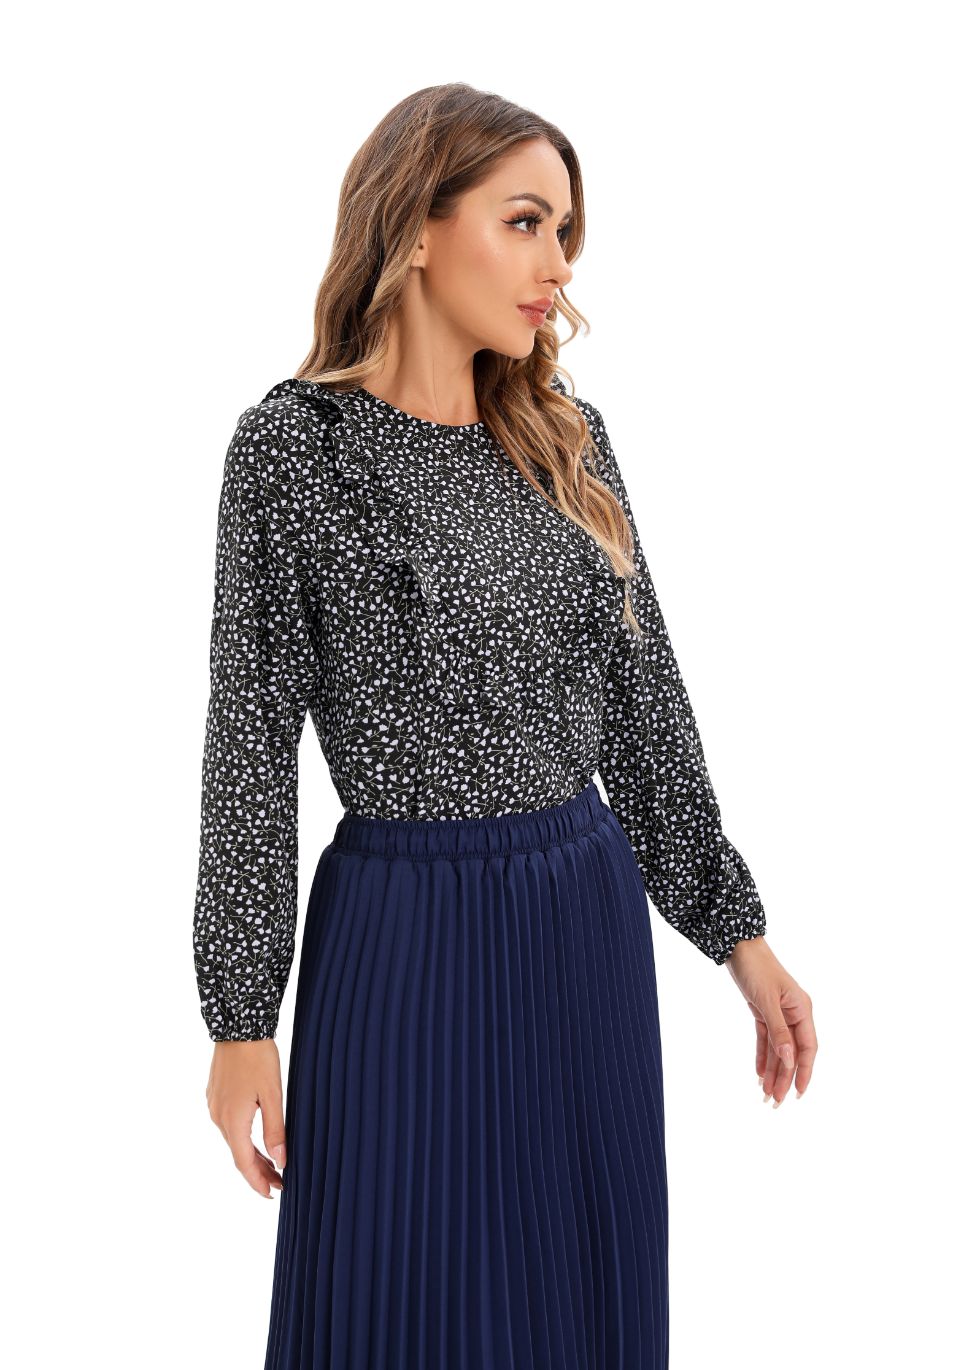 Micro Print Blouse with Long Sleeves and Bib Front - MissFinchNYC